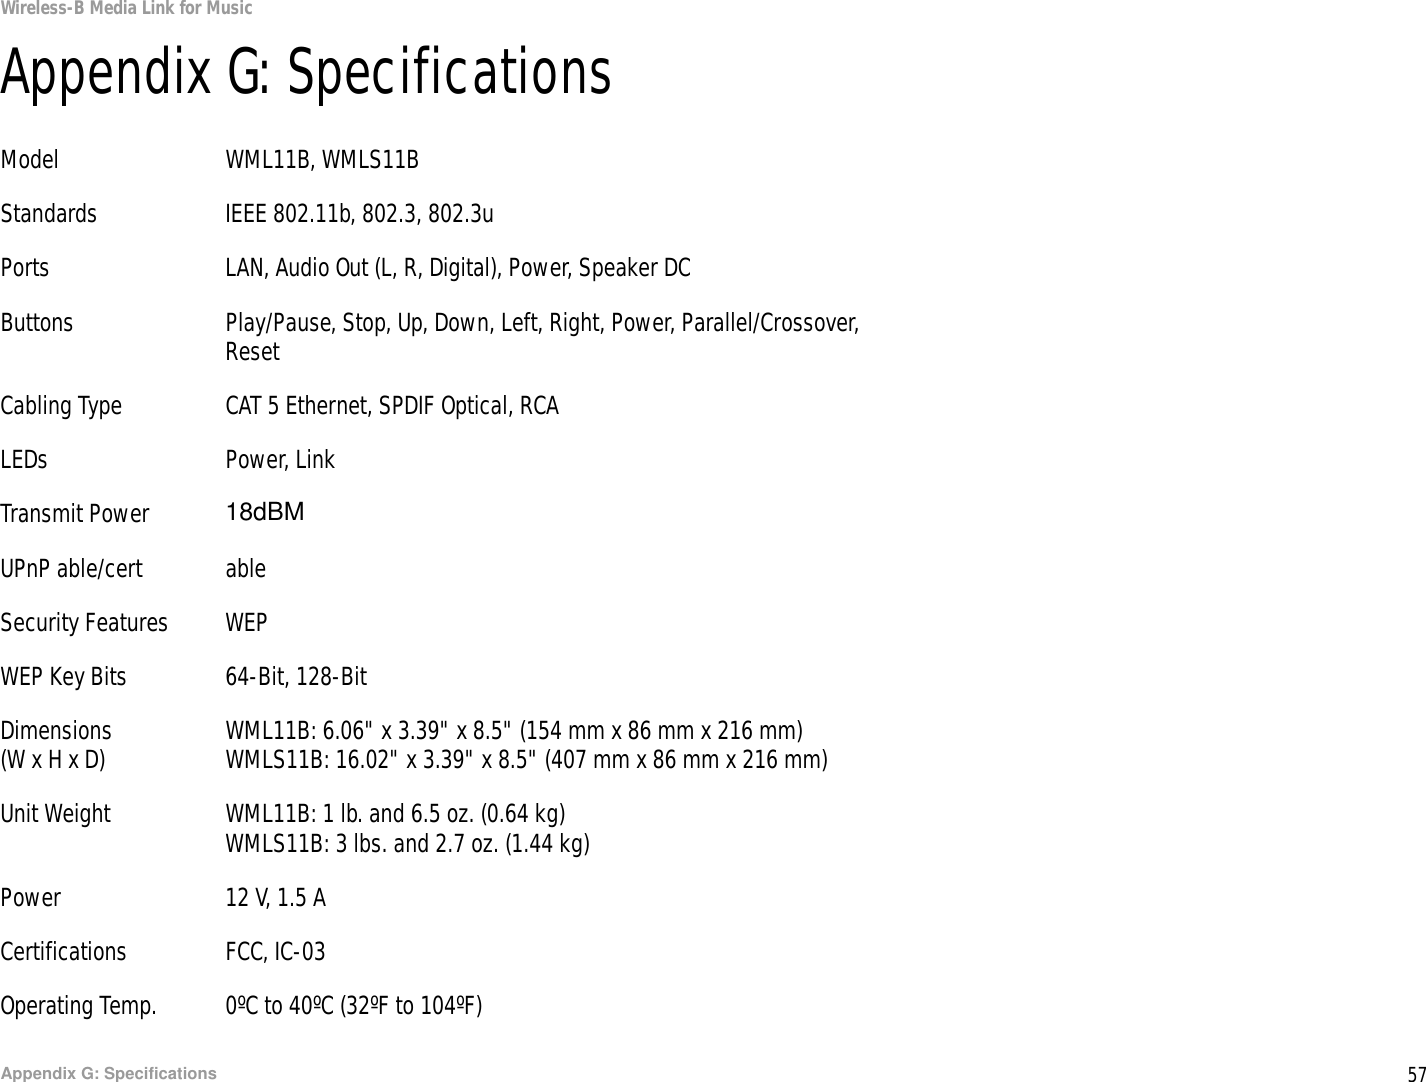 57Appendix G: SpecificationsWireless-B Media Link for MusicAppendix G: SpecificationsModel WML11B, WMLS11BStandards IEEE 802.11b, 802.3, 802.3uPorts LAN, Audio Out (L, R, Digital), Power, Speaker DCButtons Play/Pause, Stop, Up, Down, Left, Right, Power, Parallel/Crossover,ResetCabling Type CAT 5 Ethernet, SPDIF Optical, RCALEDs Power, LinkTransmit Power 22 dBmUPnP able/cert ableSecurity Features WEPWEP Key Bits 64-Bit, 128-BitDimensions WML11B: 6.06&quot; x 3.39&quot; x 8.5&quot; (154 mm x 86 mm x 216 mm)(W x H x D) WMLS11B: 16.02&quot; x 3.39&quot; x 8.5&quot; (407 mm x 86 mm x 216 mm)Unit Weight WML11B: 1 lb. and 6.5 oz. (0.64 kg)WMLS11B: 3 lbs. and 2.7 oz. (1.44 kg)Power 12 V, 1.5 ACertifications FCC, IC-03Operating Temp. 0ºC to 40ºC (32ºF to 104ºF)18dBM